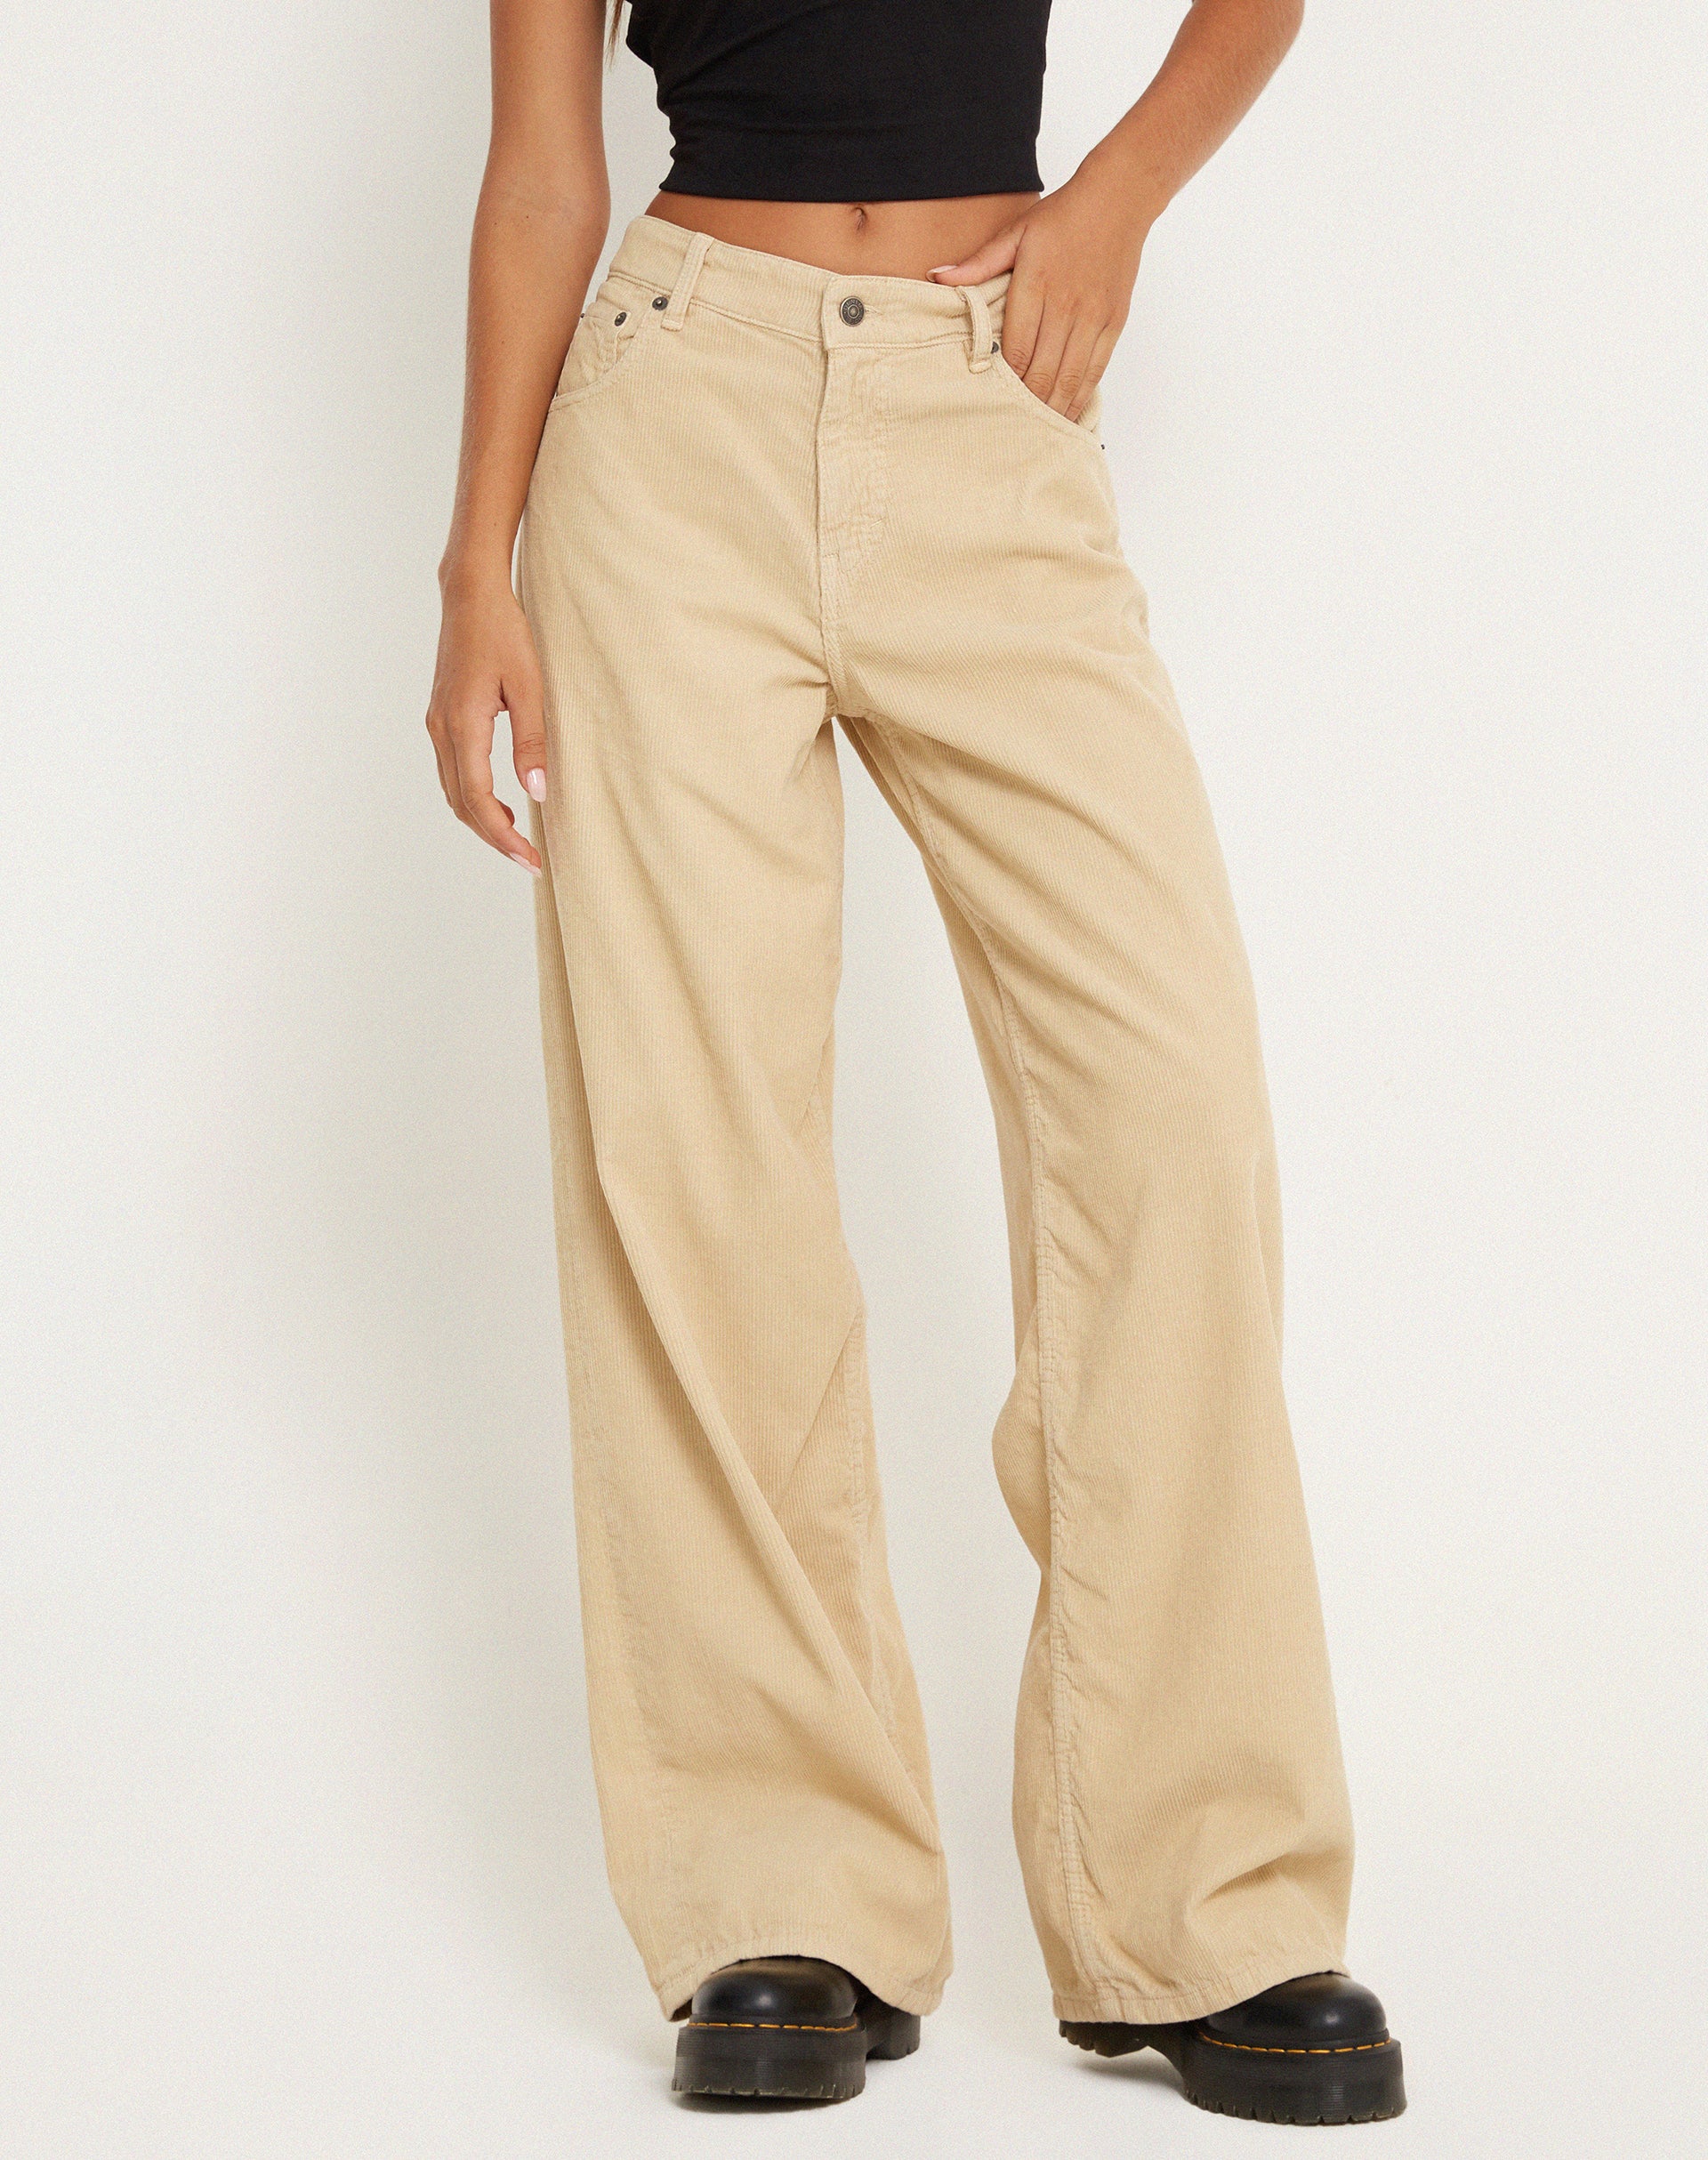 Image of Roomy Extra Wide Jeans in Cord Light Tan